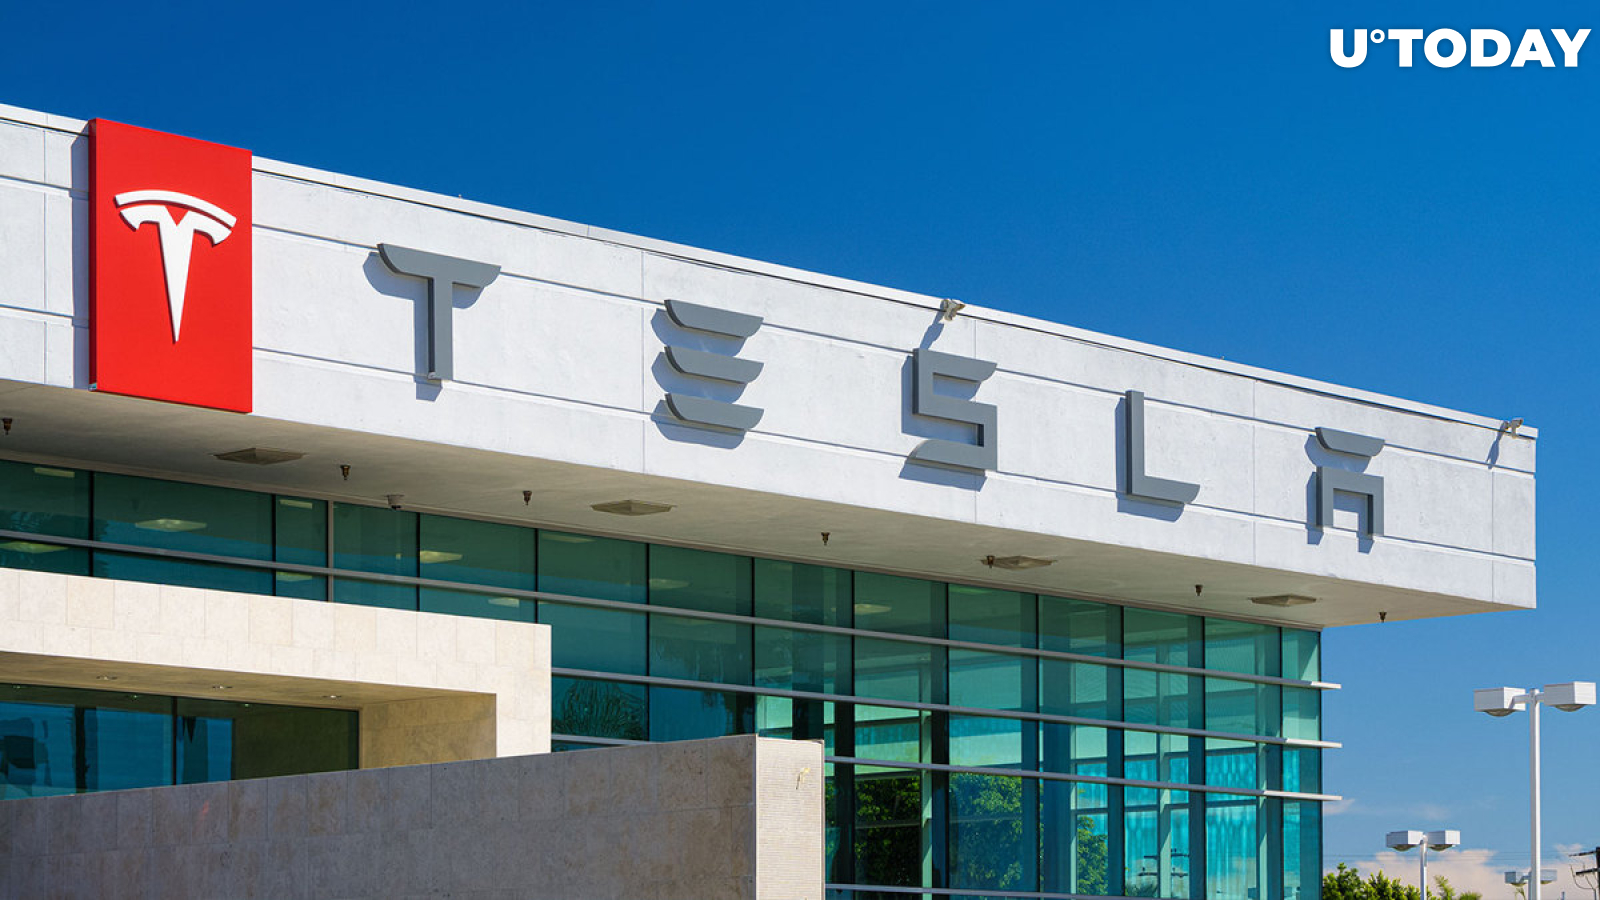 Tesla Puts Crypto Operations on Hold, According to Quarterly Financial Report